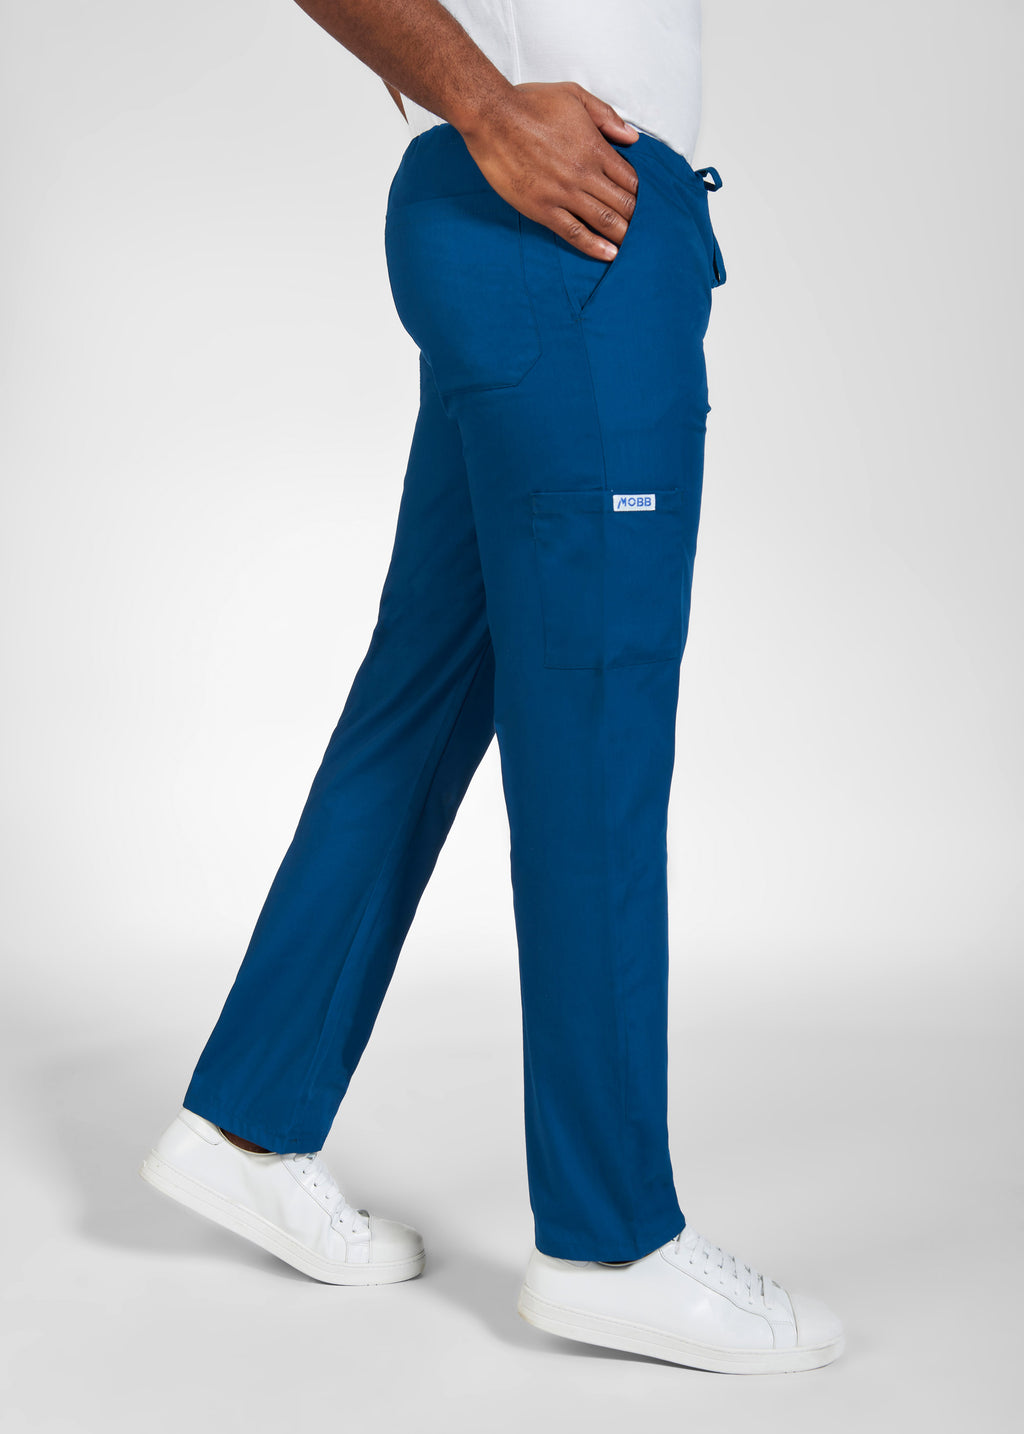 Clearance Xtreme Stretch by Dickies Women's Drawstring Scrub Pant | Dickies  Medical